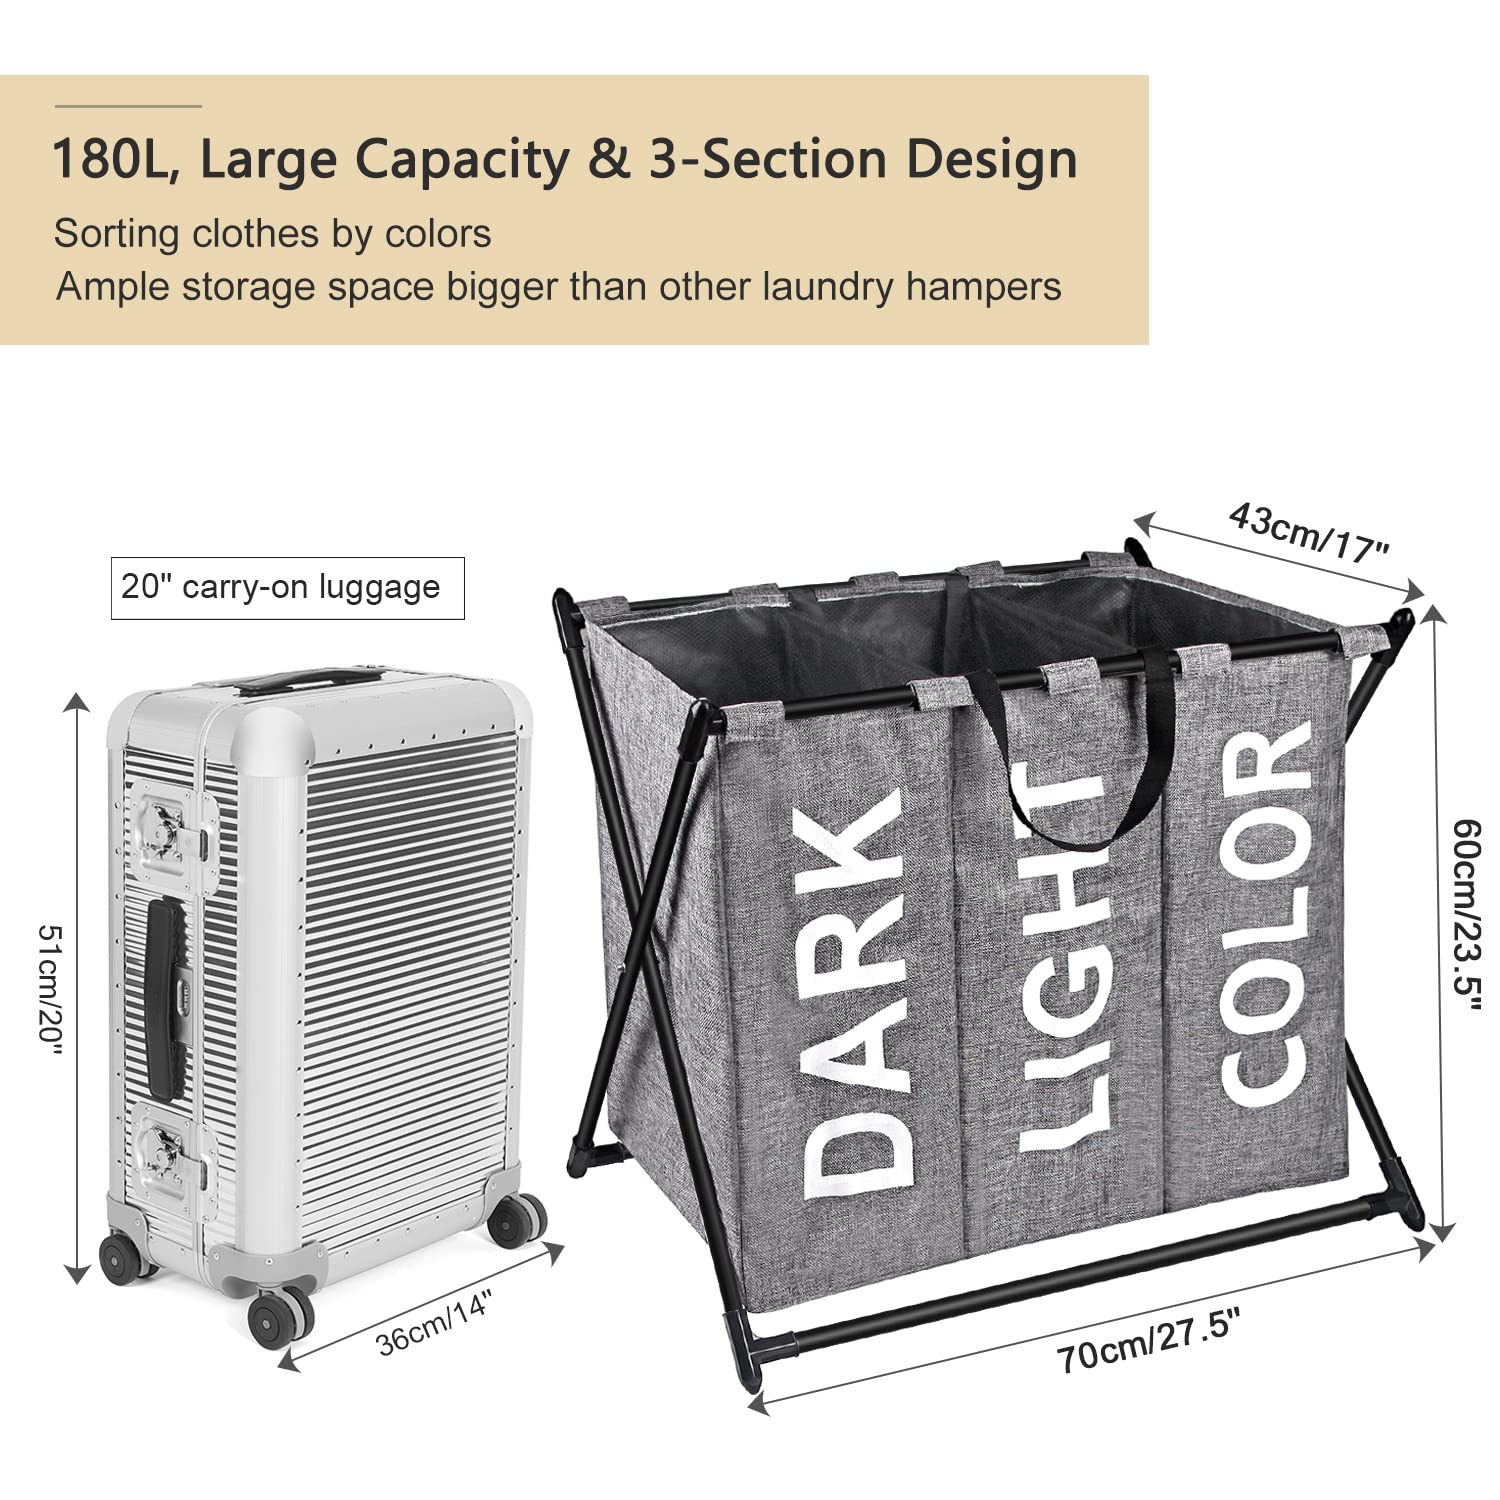 X-cosrack 180L Laundry Hamper 3 Sections Laundry Sorter, Foldable & Collapsible 3 Bin Laundry Hamper with Handles, Waterproof Lining Laundry Organizer for Dirty Clothes & Kid's Puppets, Black, Grey